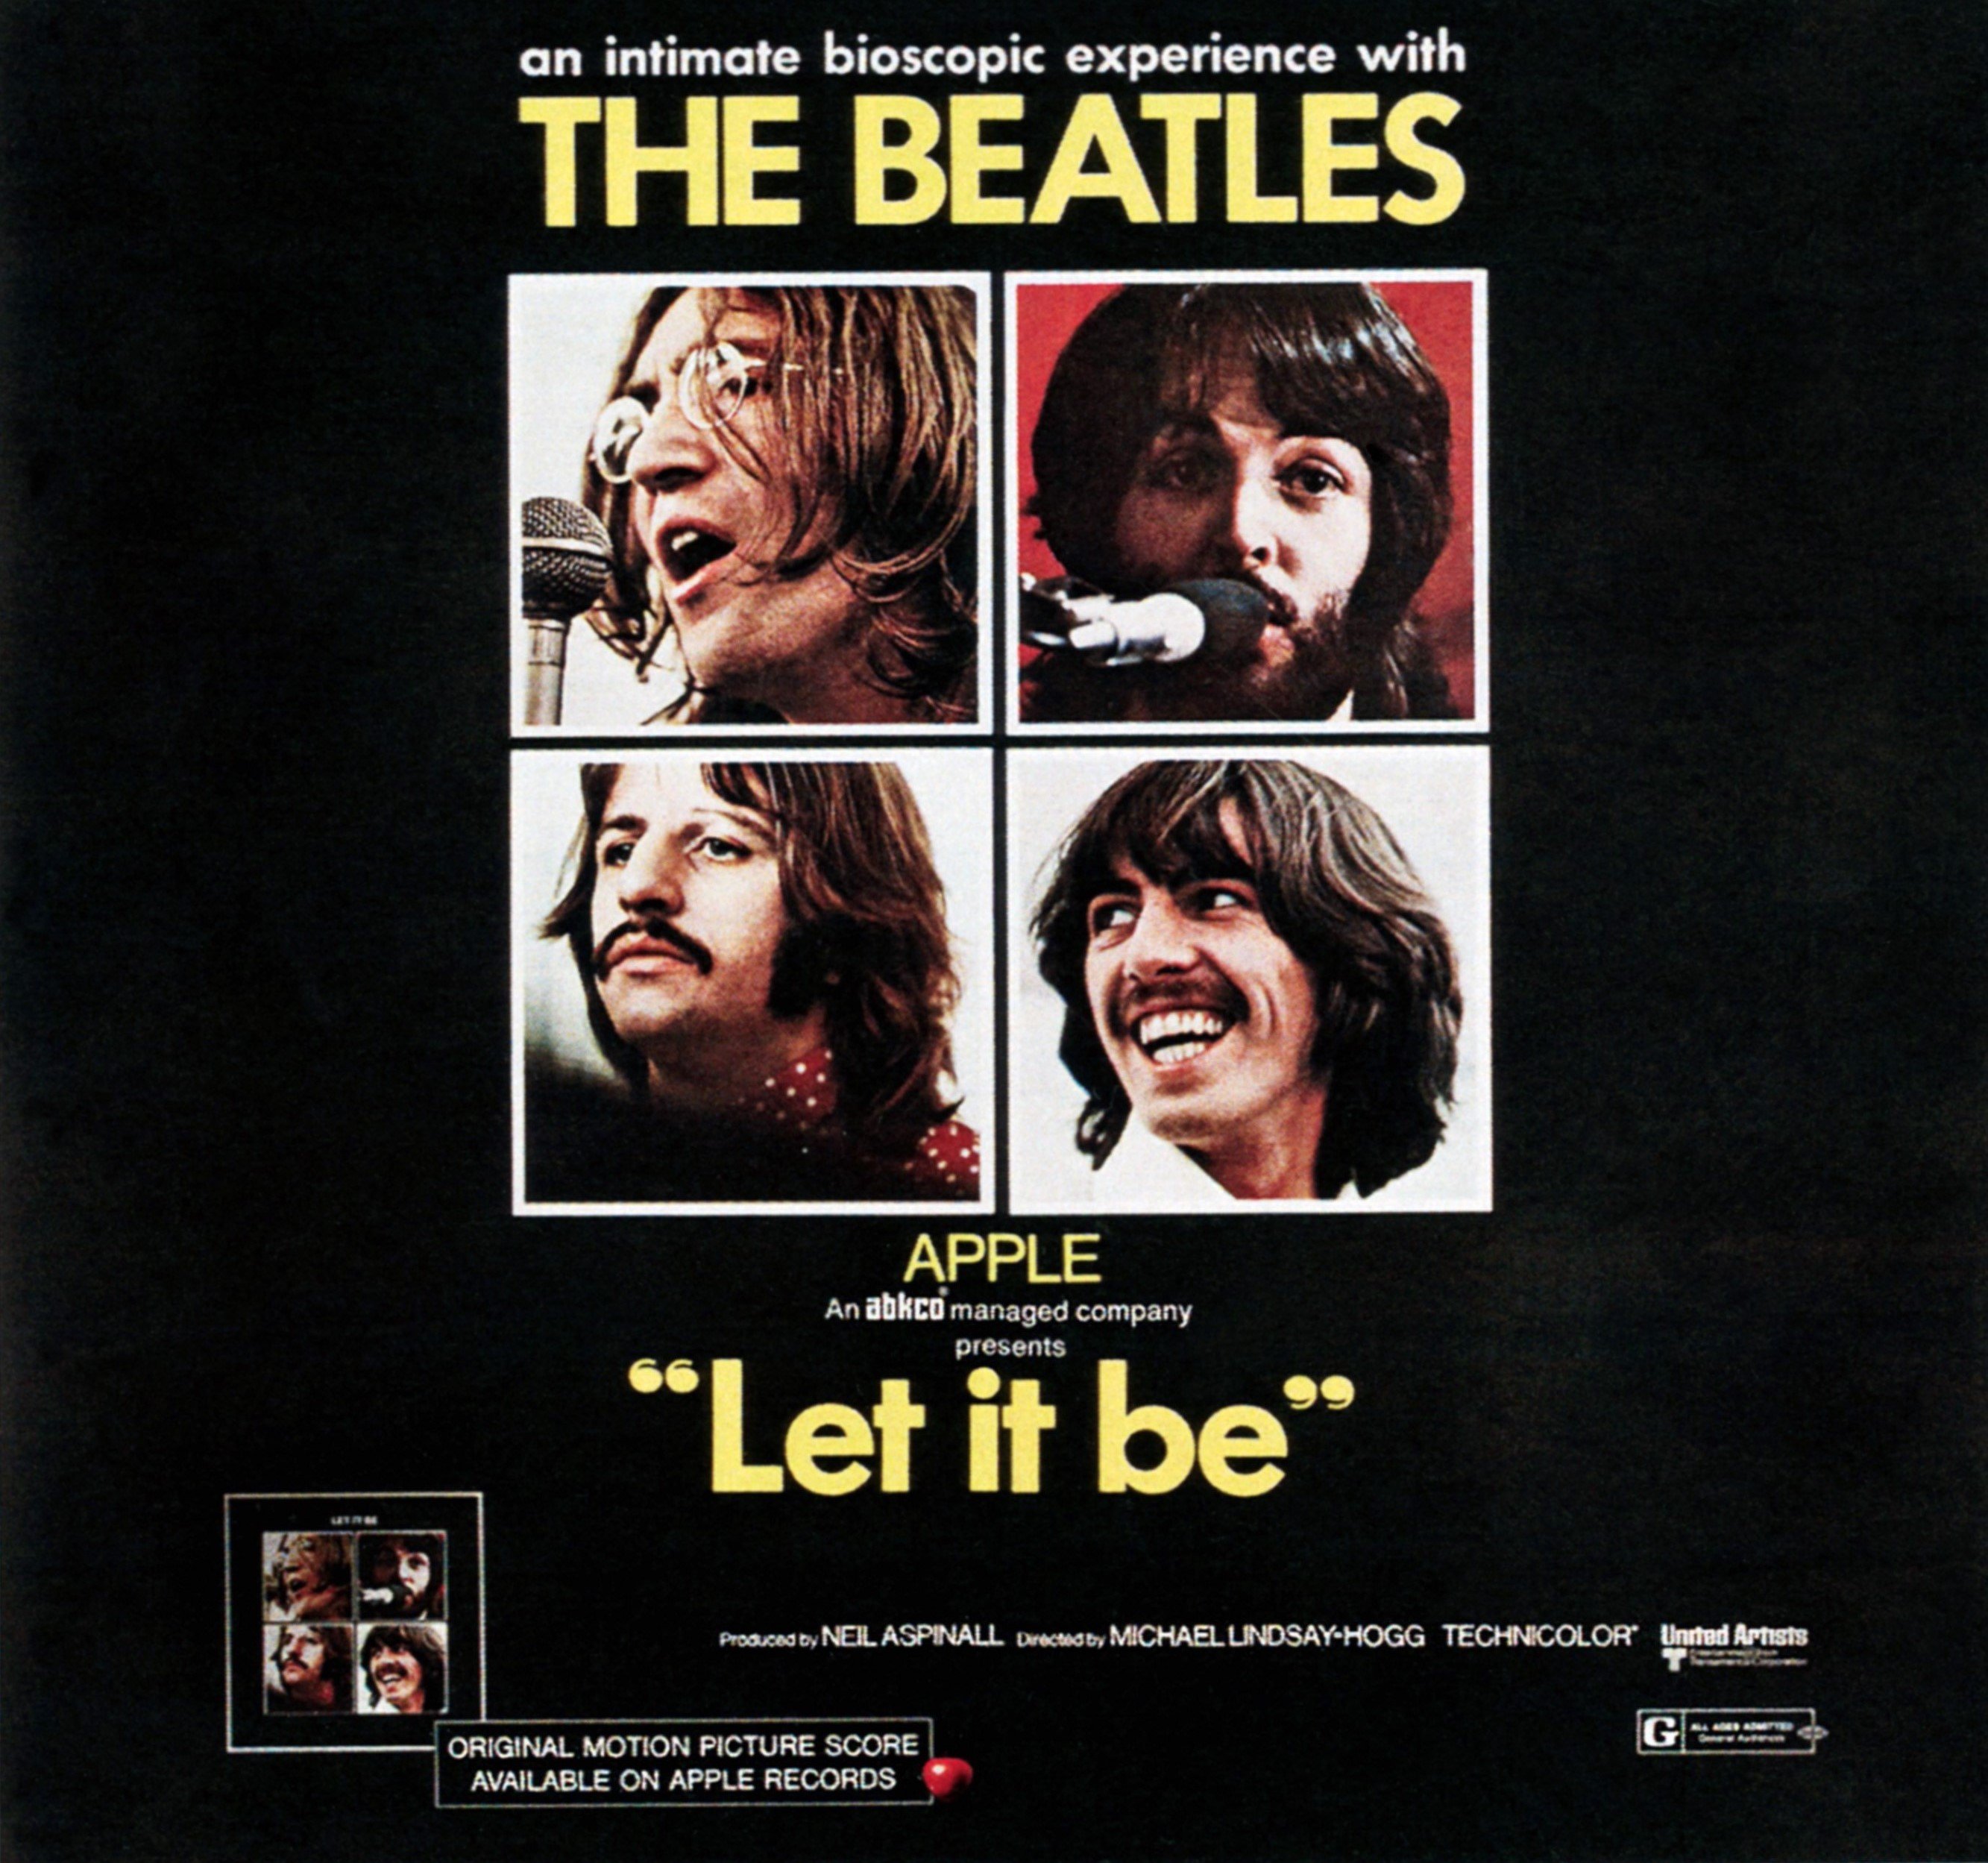 A poster for The Beatles' 'Let It Be' depicting the Fab Four